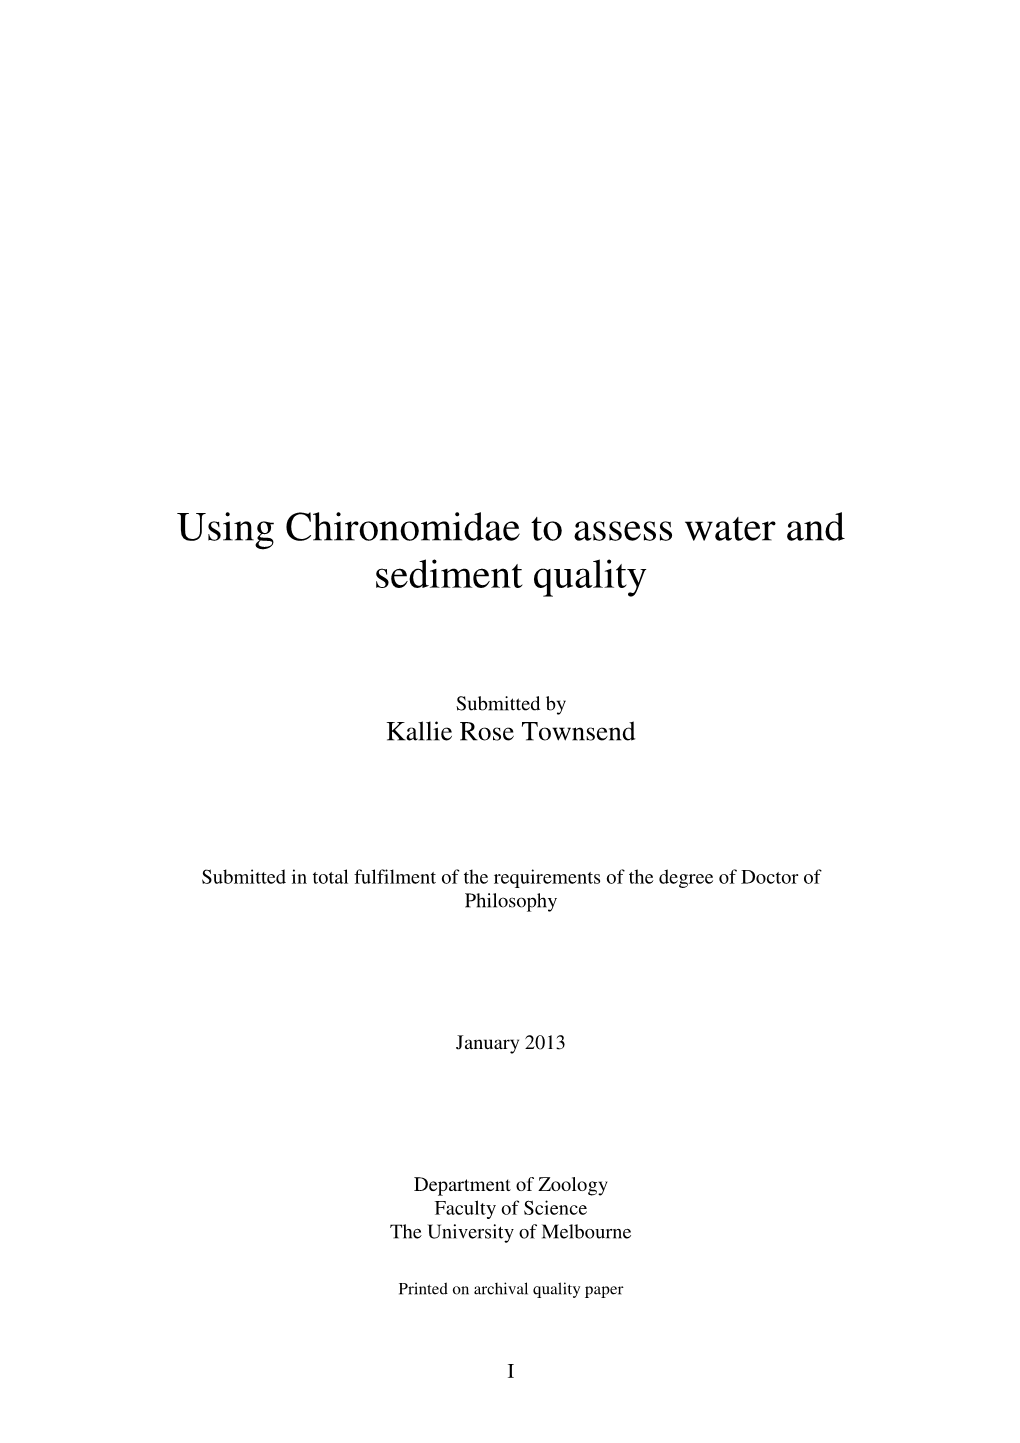 Using Chironomidae to Assess Water and Sediment Quality